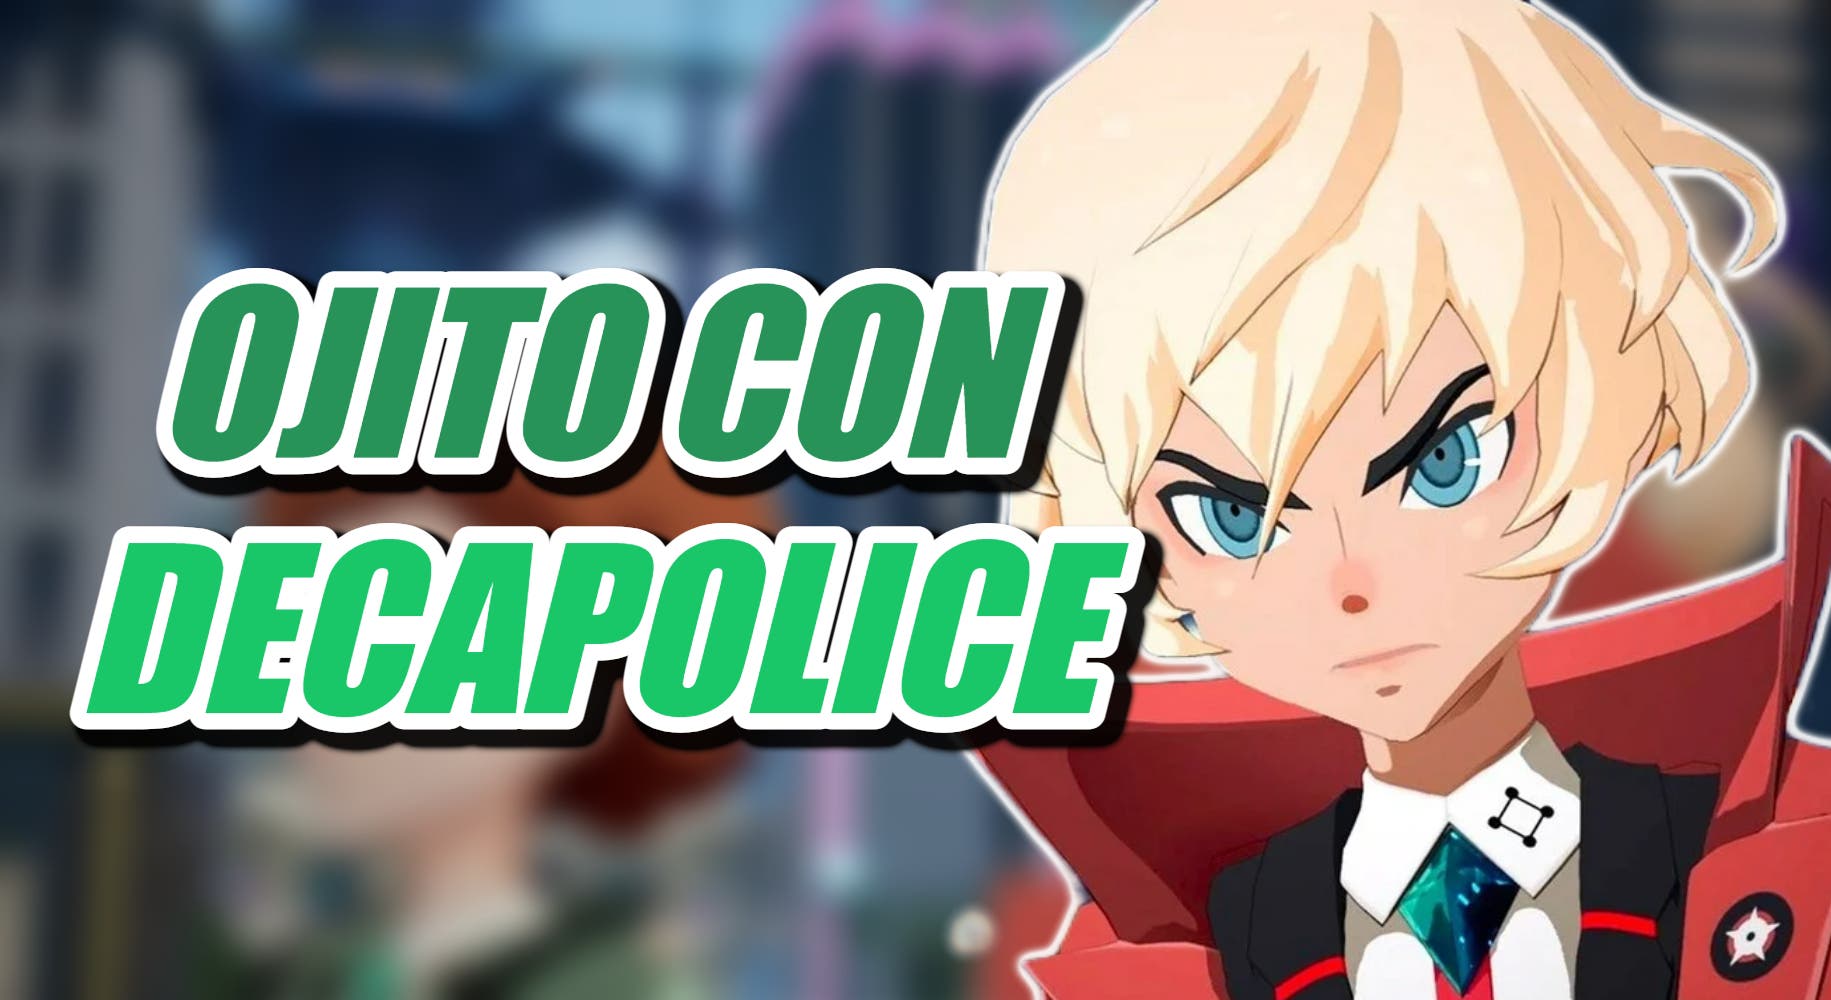 Introducing DECAPOLICE, the new LEVEL-5 RPG that fans of suspense and crime will fall in love with